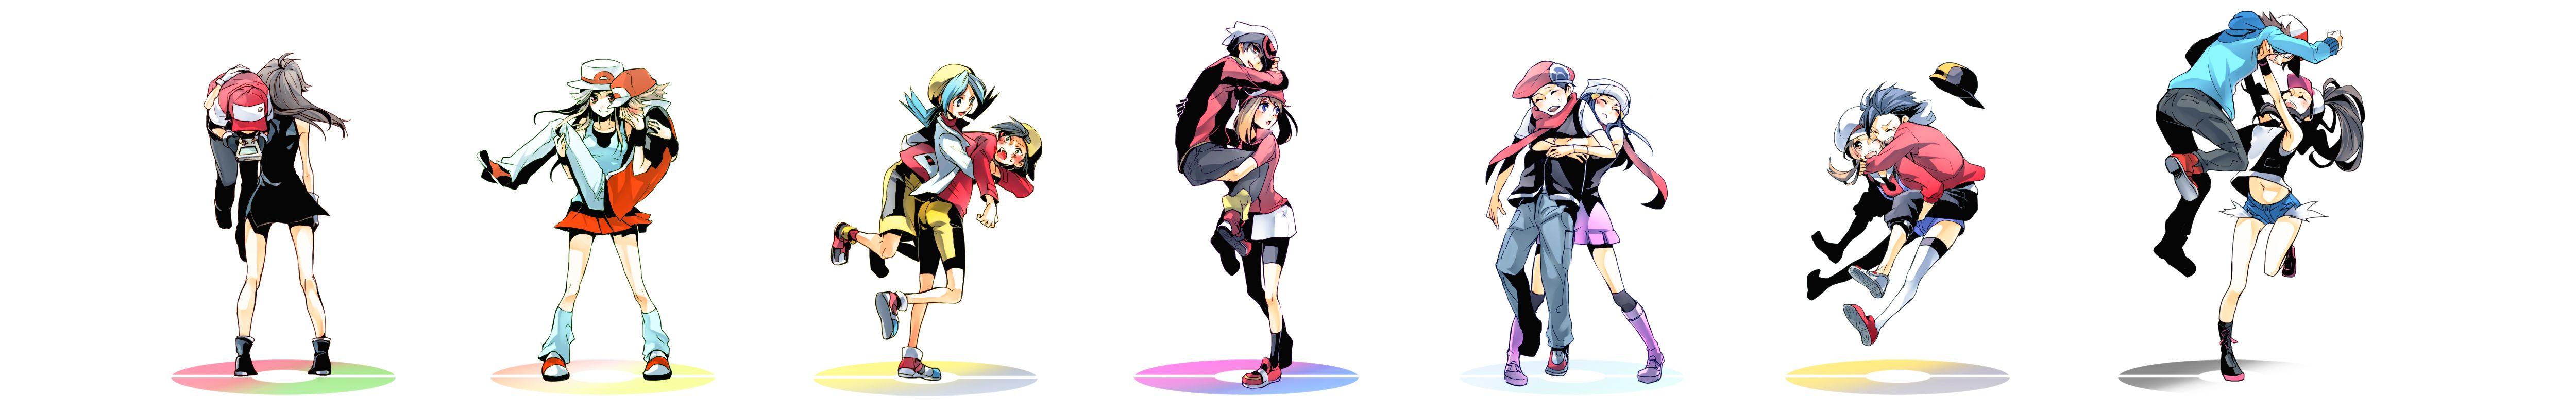 Pokemon Trainers Wallpaper and Background Imagex800